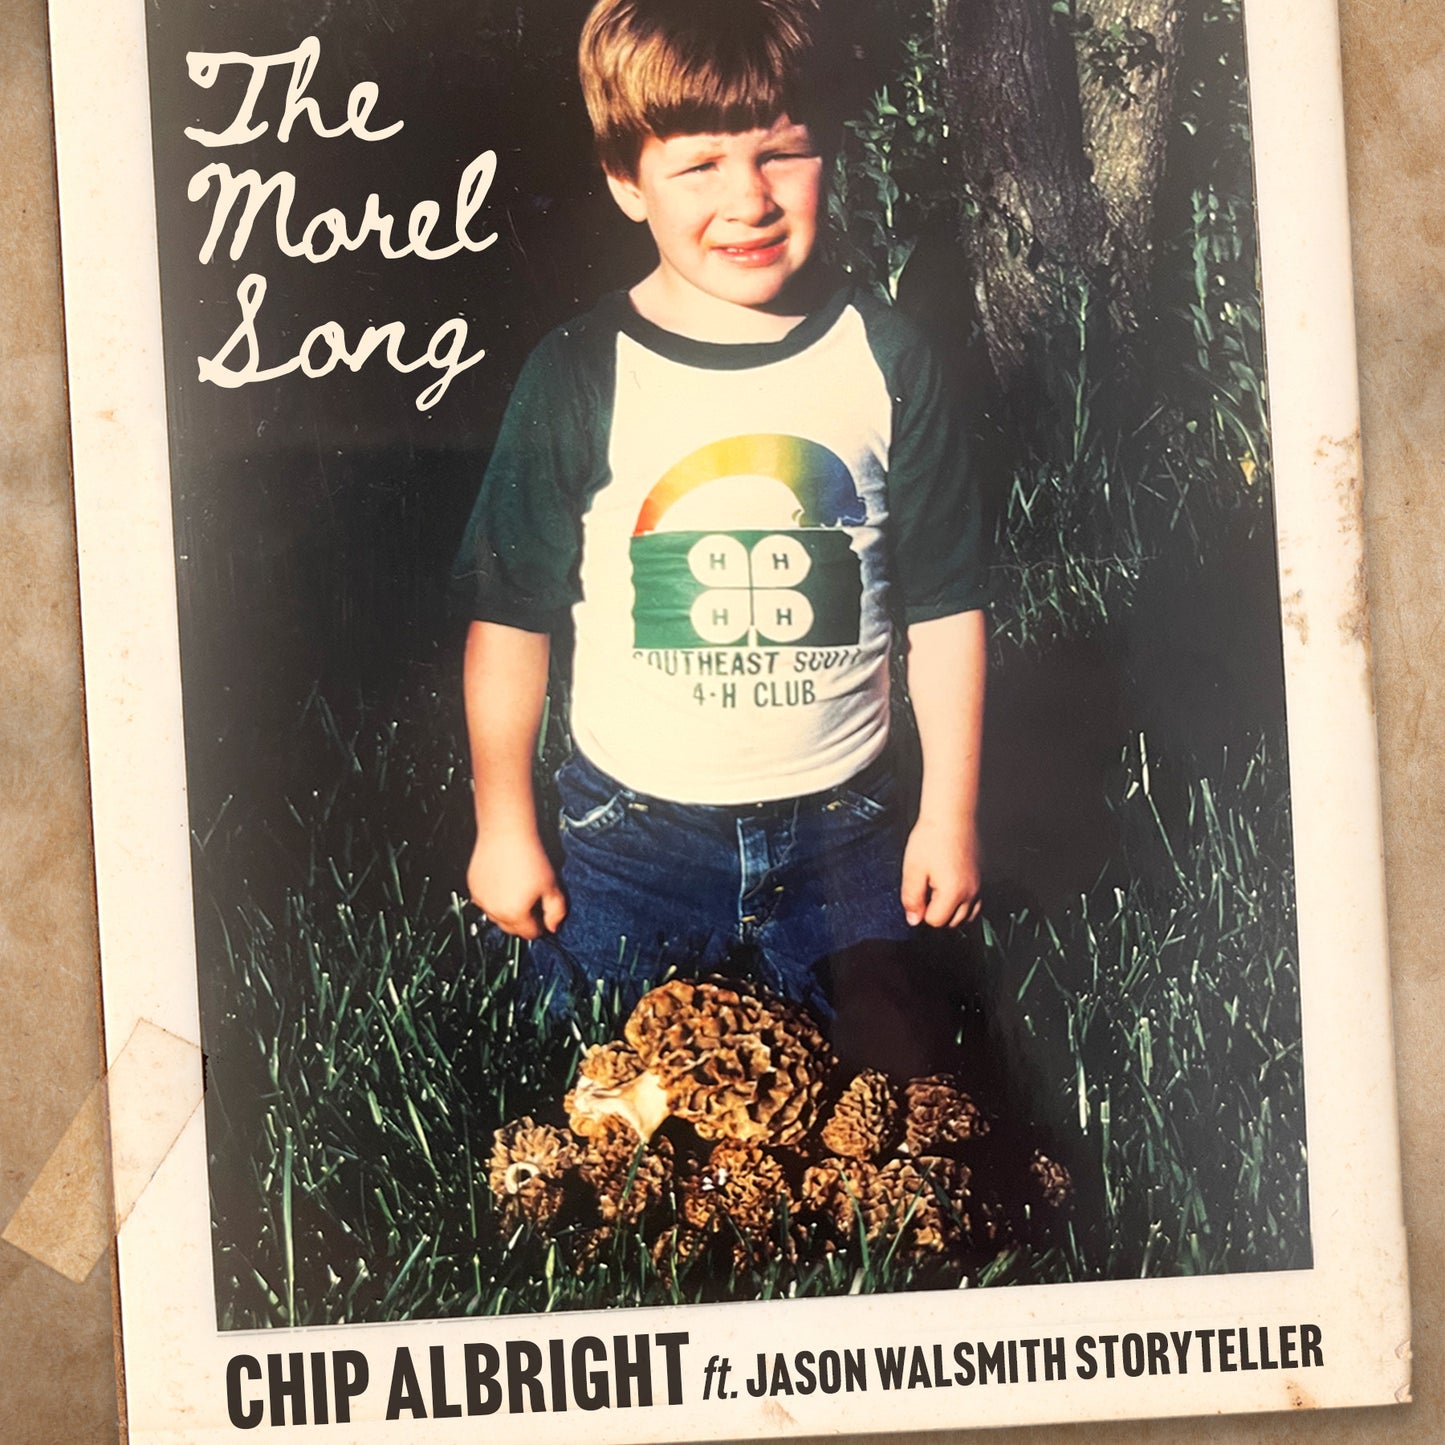 The Morel Song by Guitar Satchel Featured Artist Chip Albright w/ Jason Walsmith Storyteller